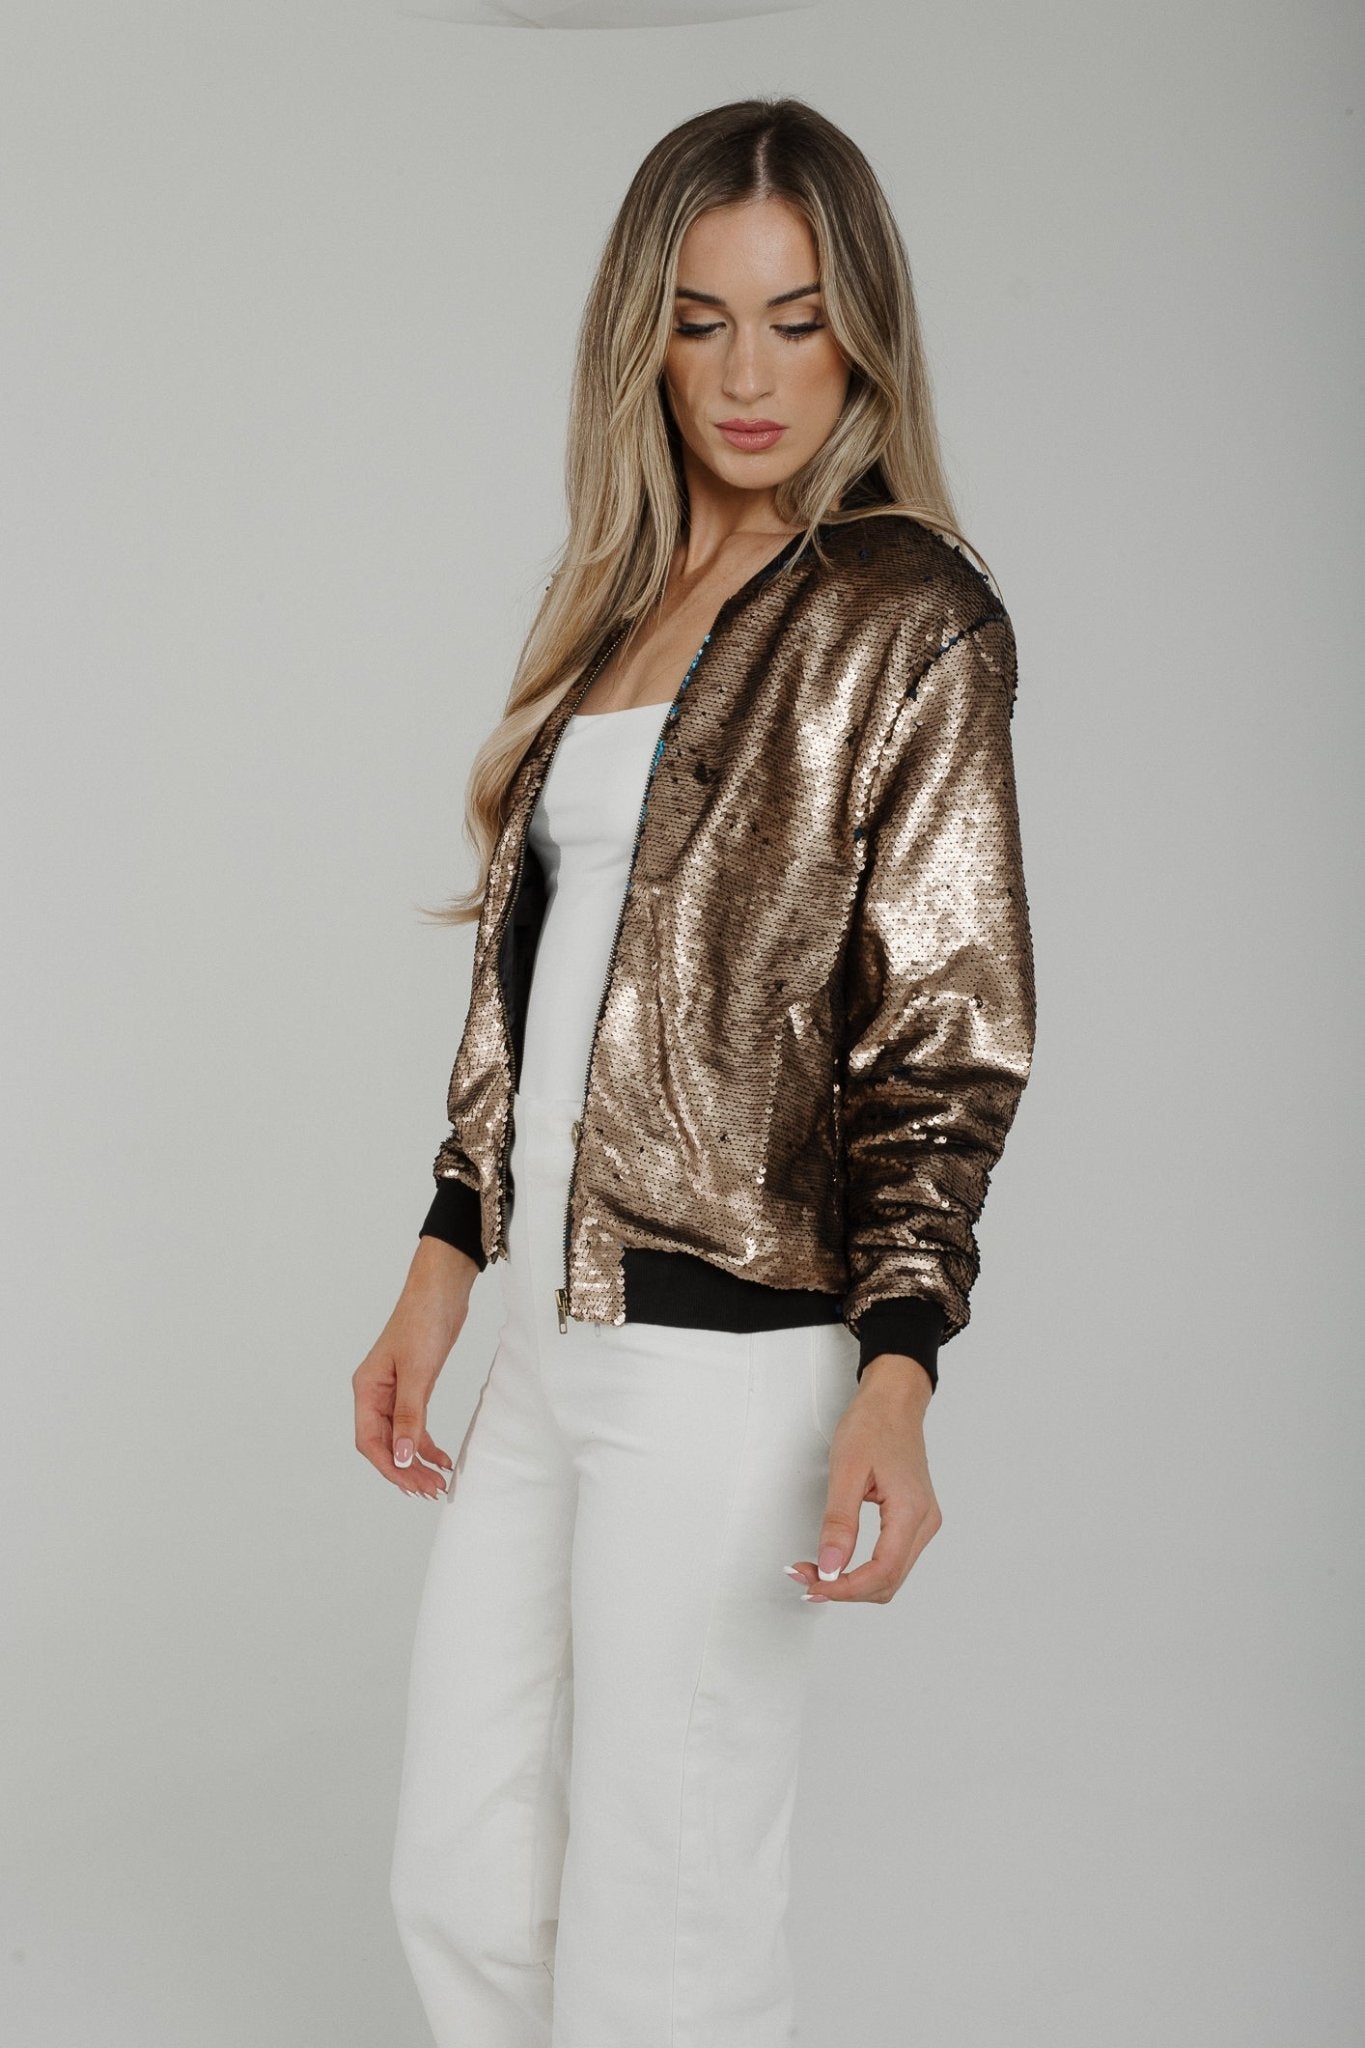 Polly Sequin Jacket In Gold - The Walk in Wardrobe